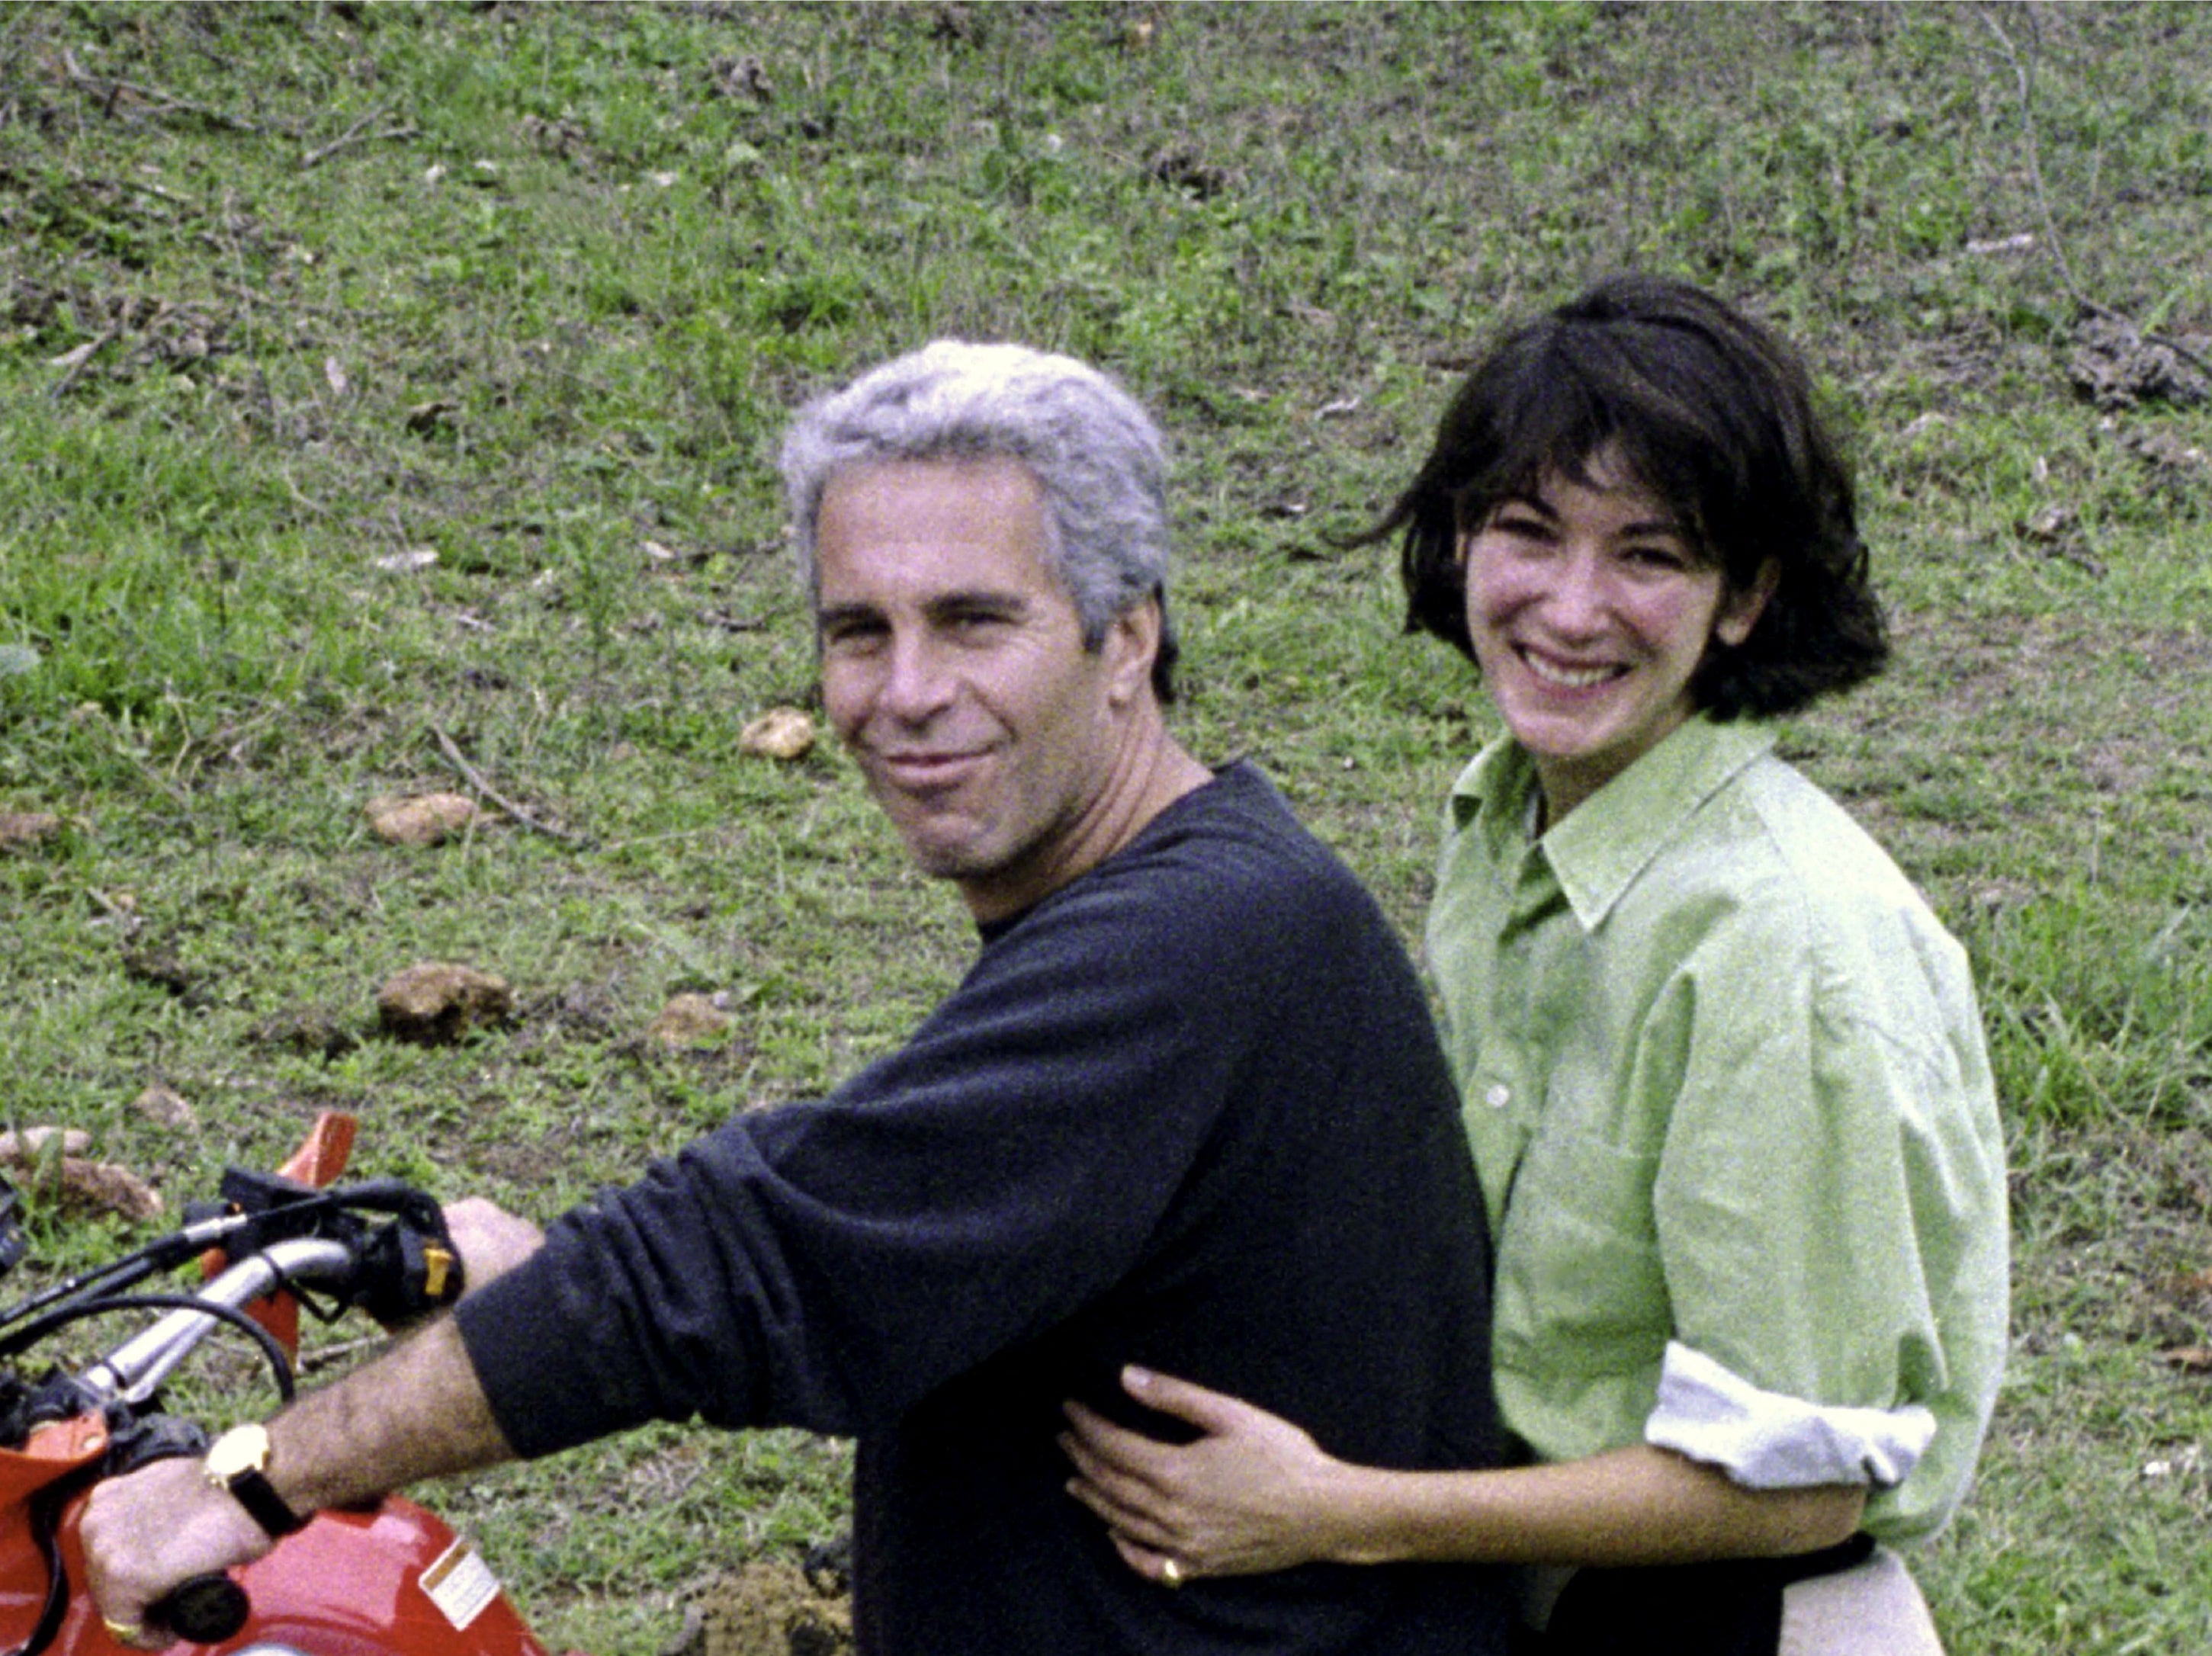 A jury found Ghislaine Maxwell”served” up victims to be abused by Jeffrey Epstein